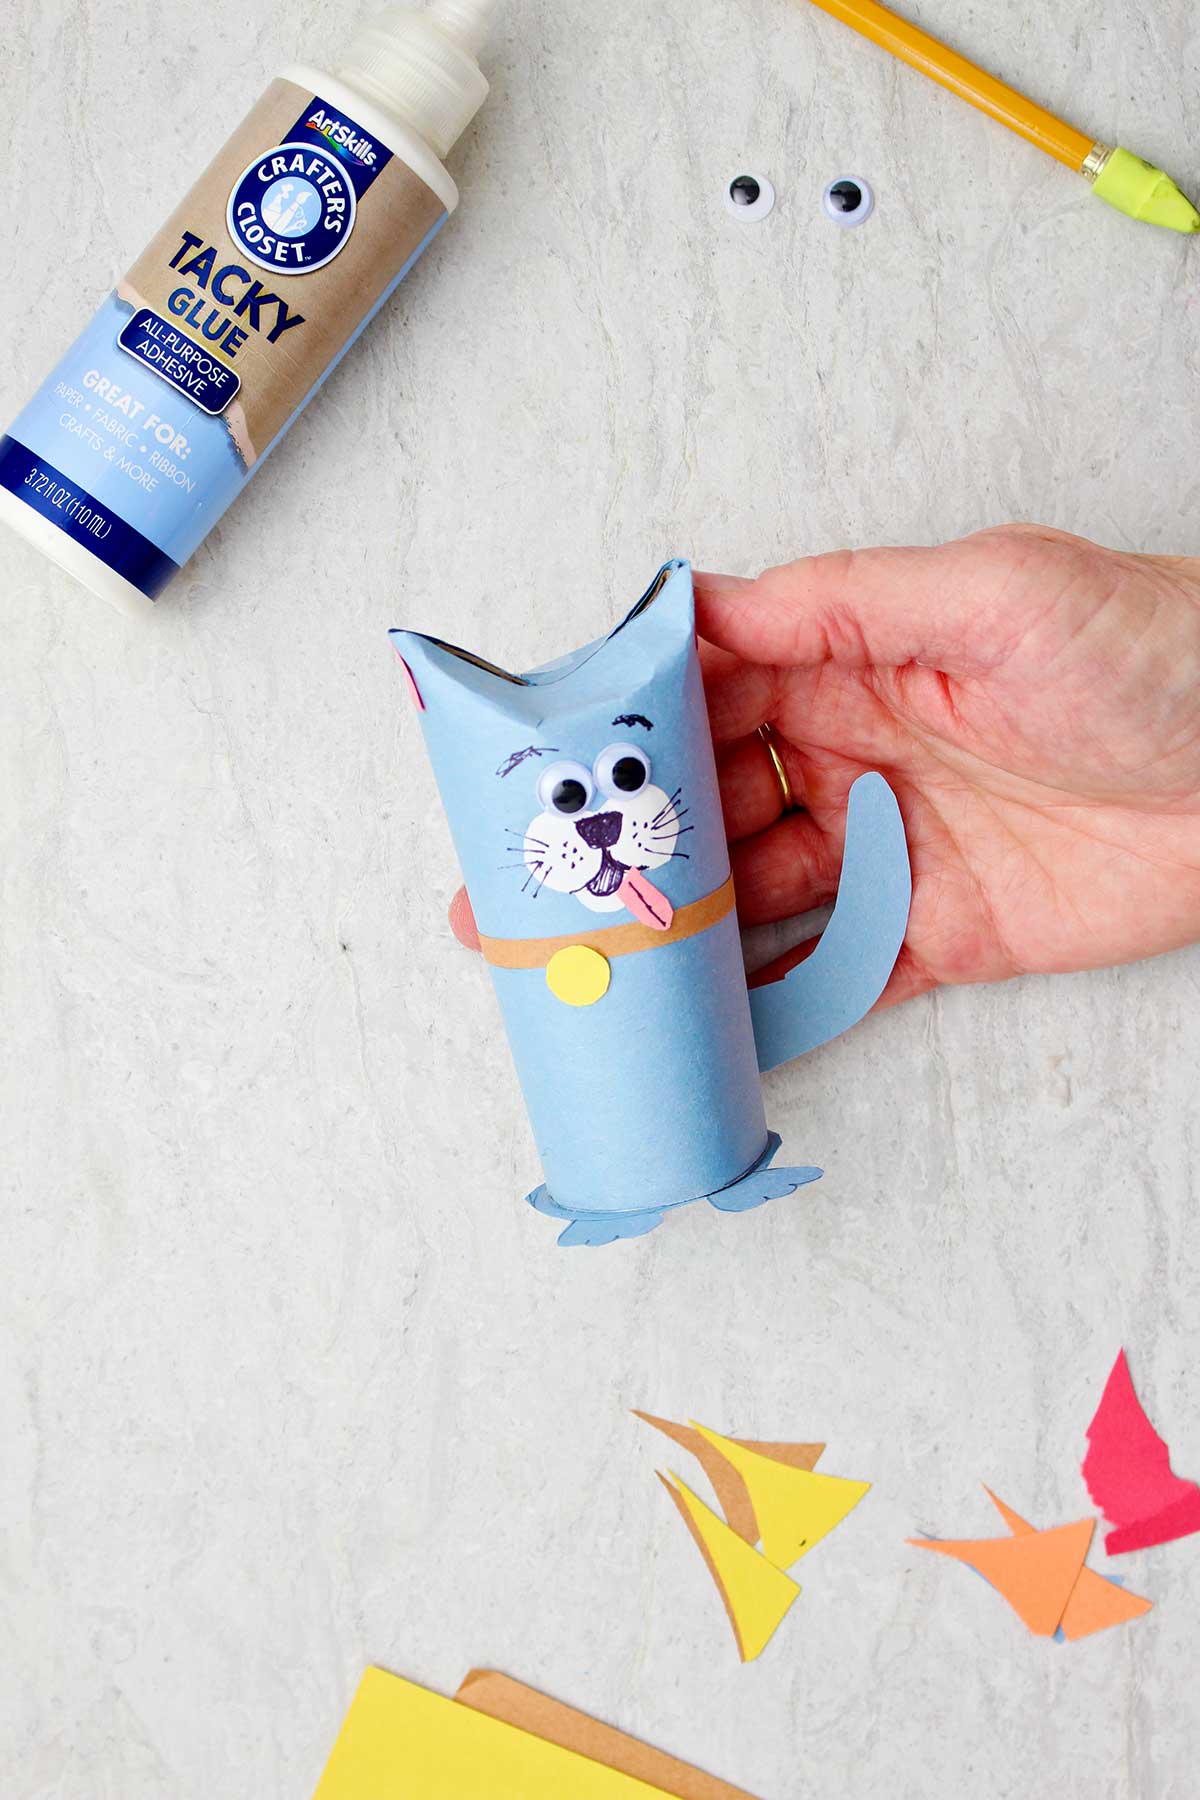 Hand holding dog toilet paper roll animal.